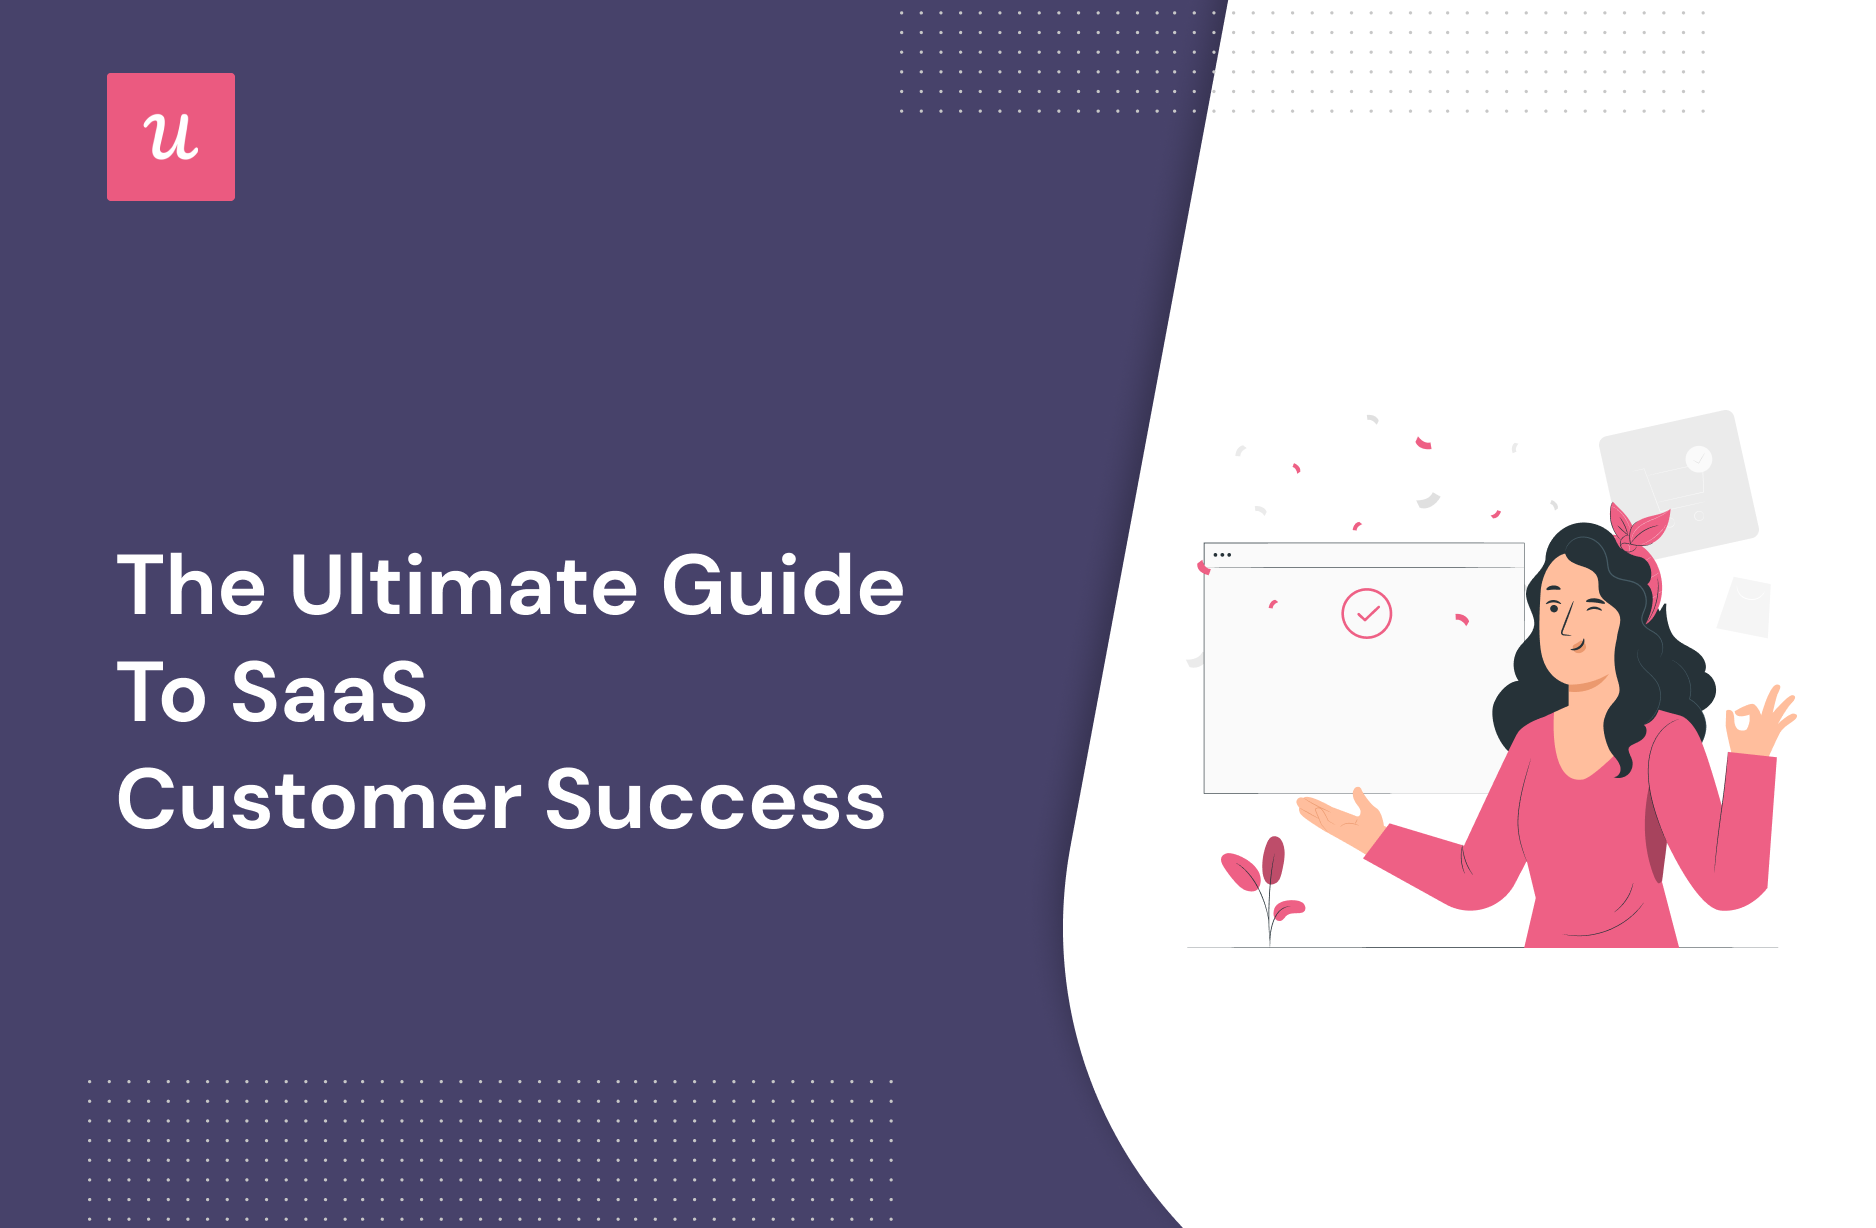 The Ultimate Guide to SaaS Customer Success